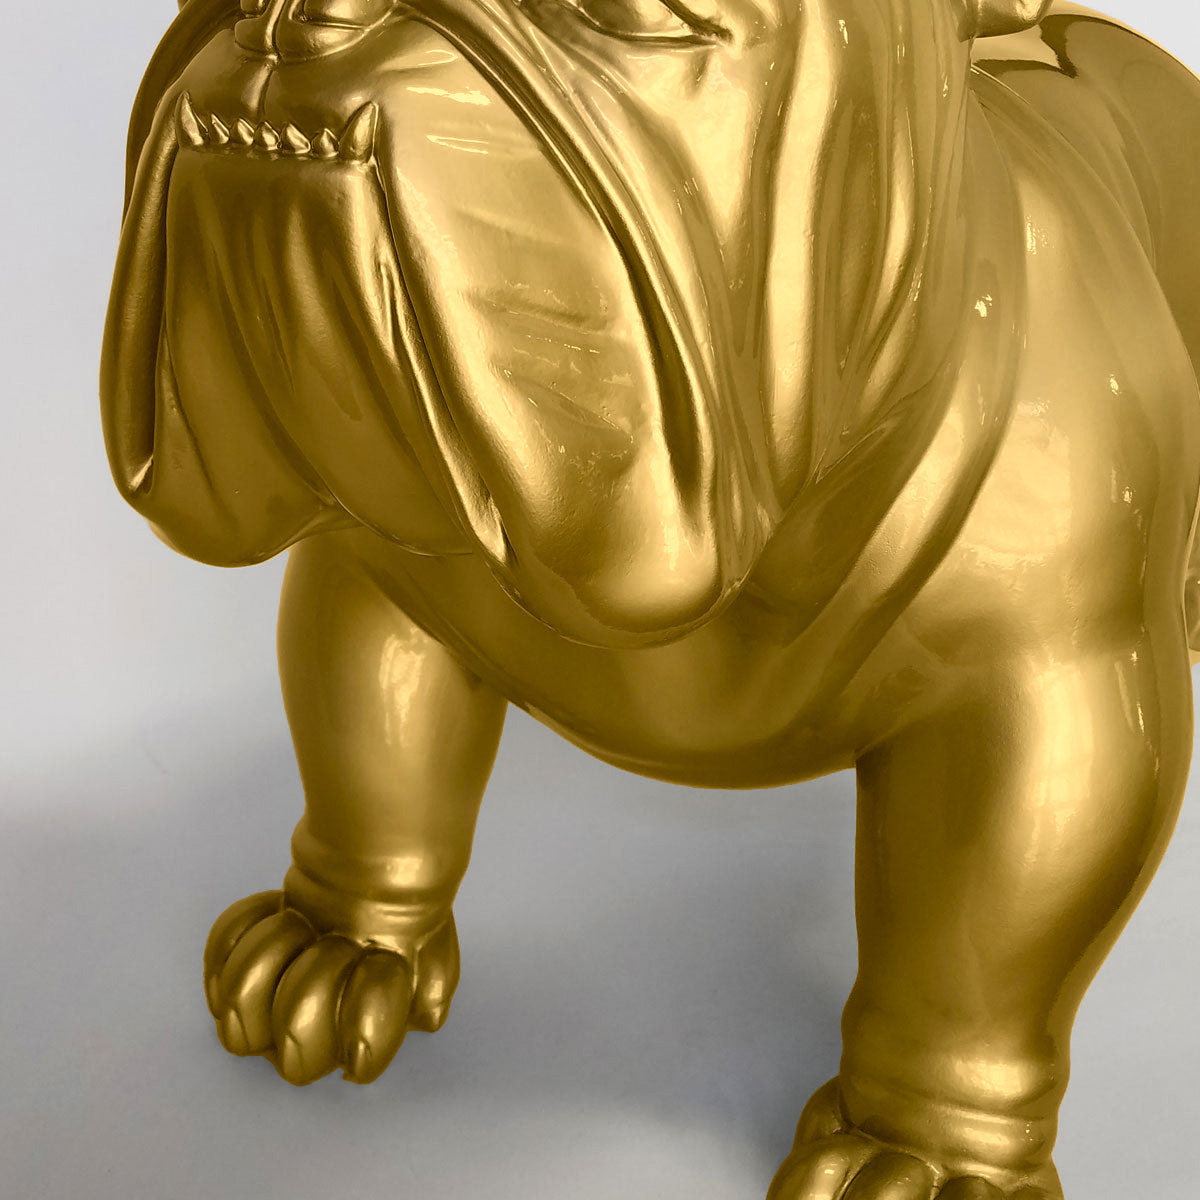 Bulldog Sculpture, Gold Painted, MD